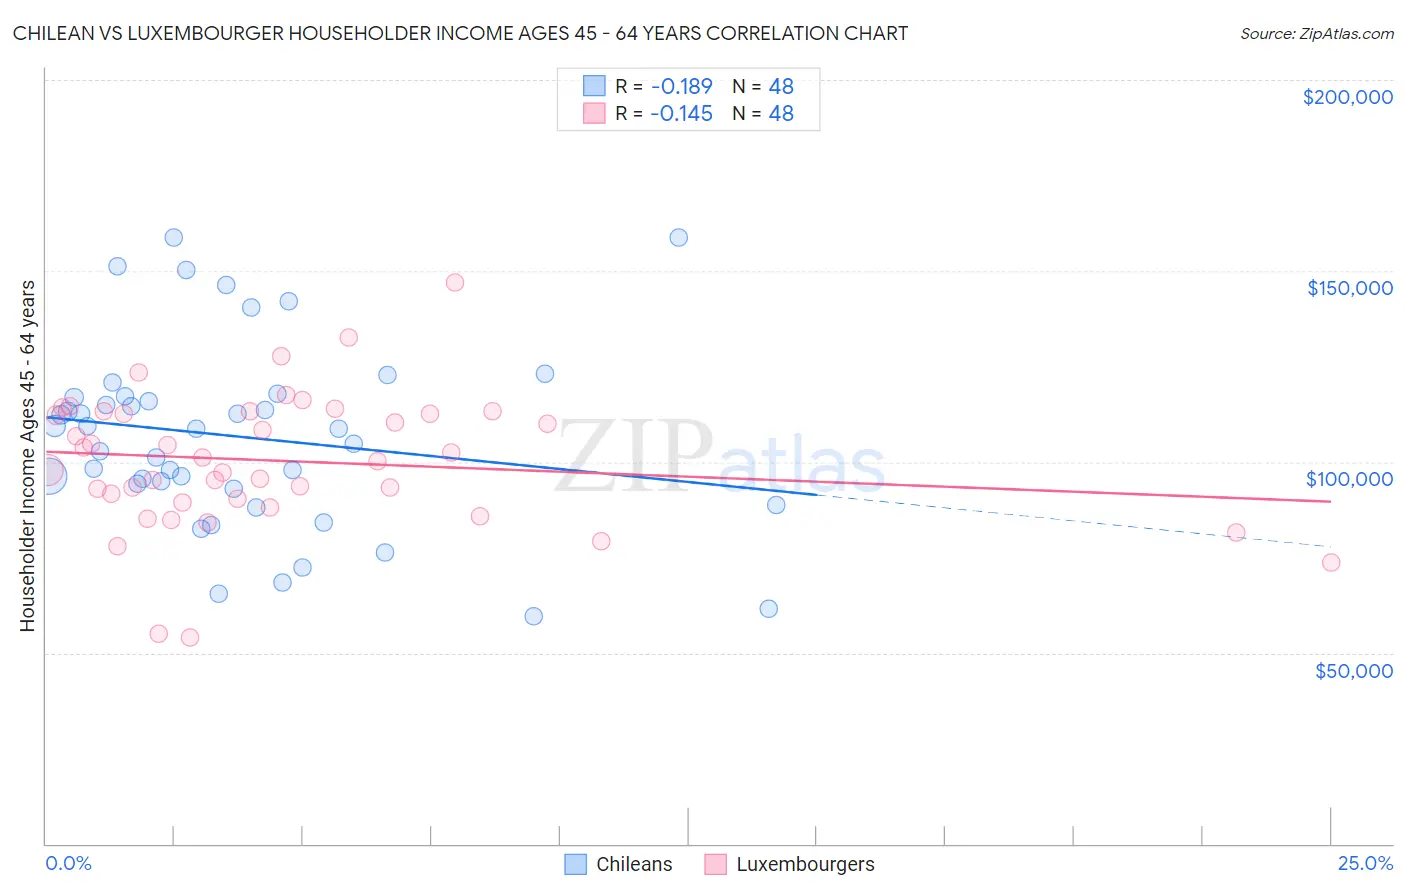 Chilean vs Luxembourger Householder Income Ages 45 - 64 years